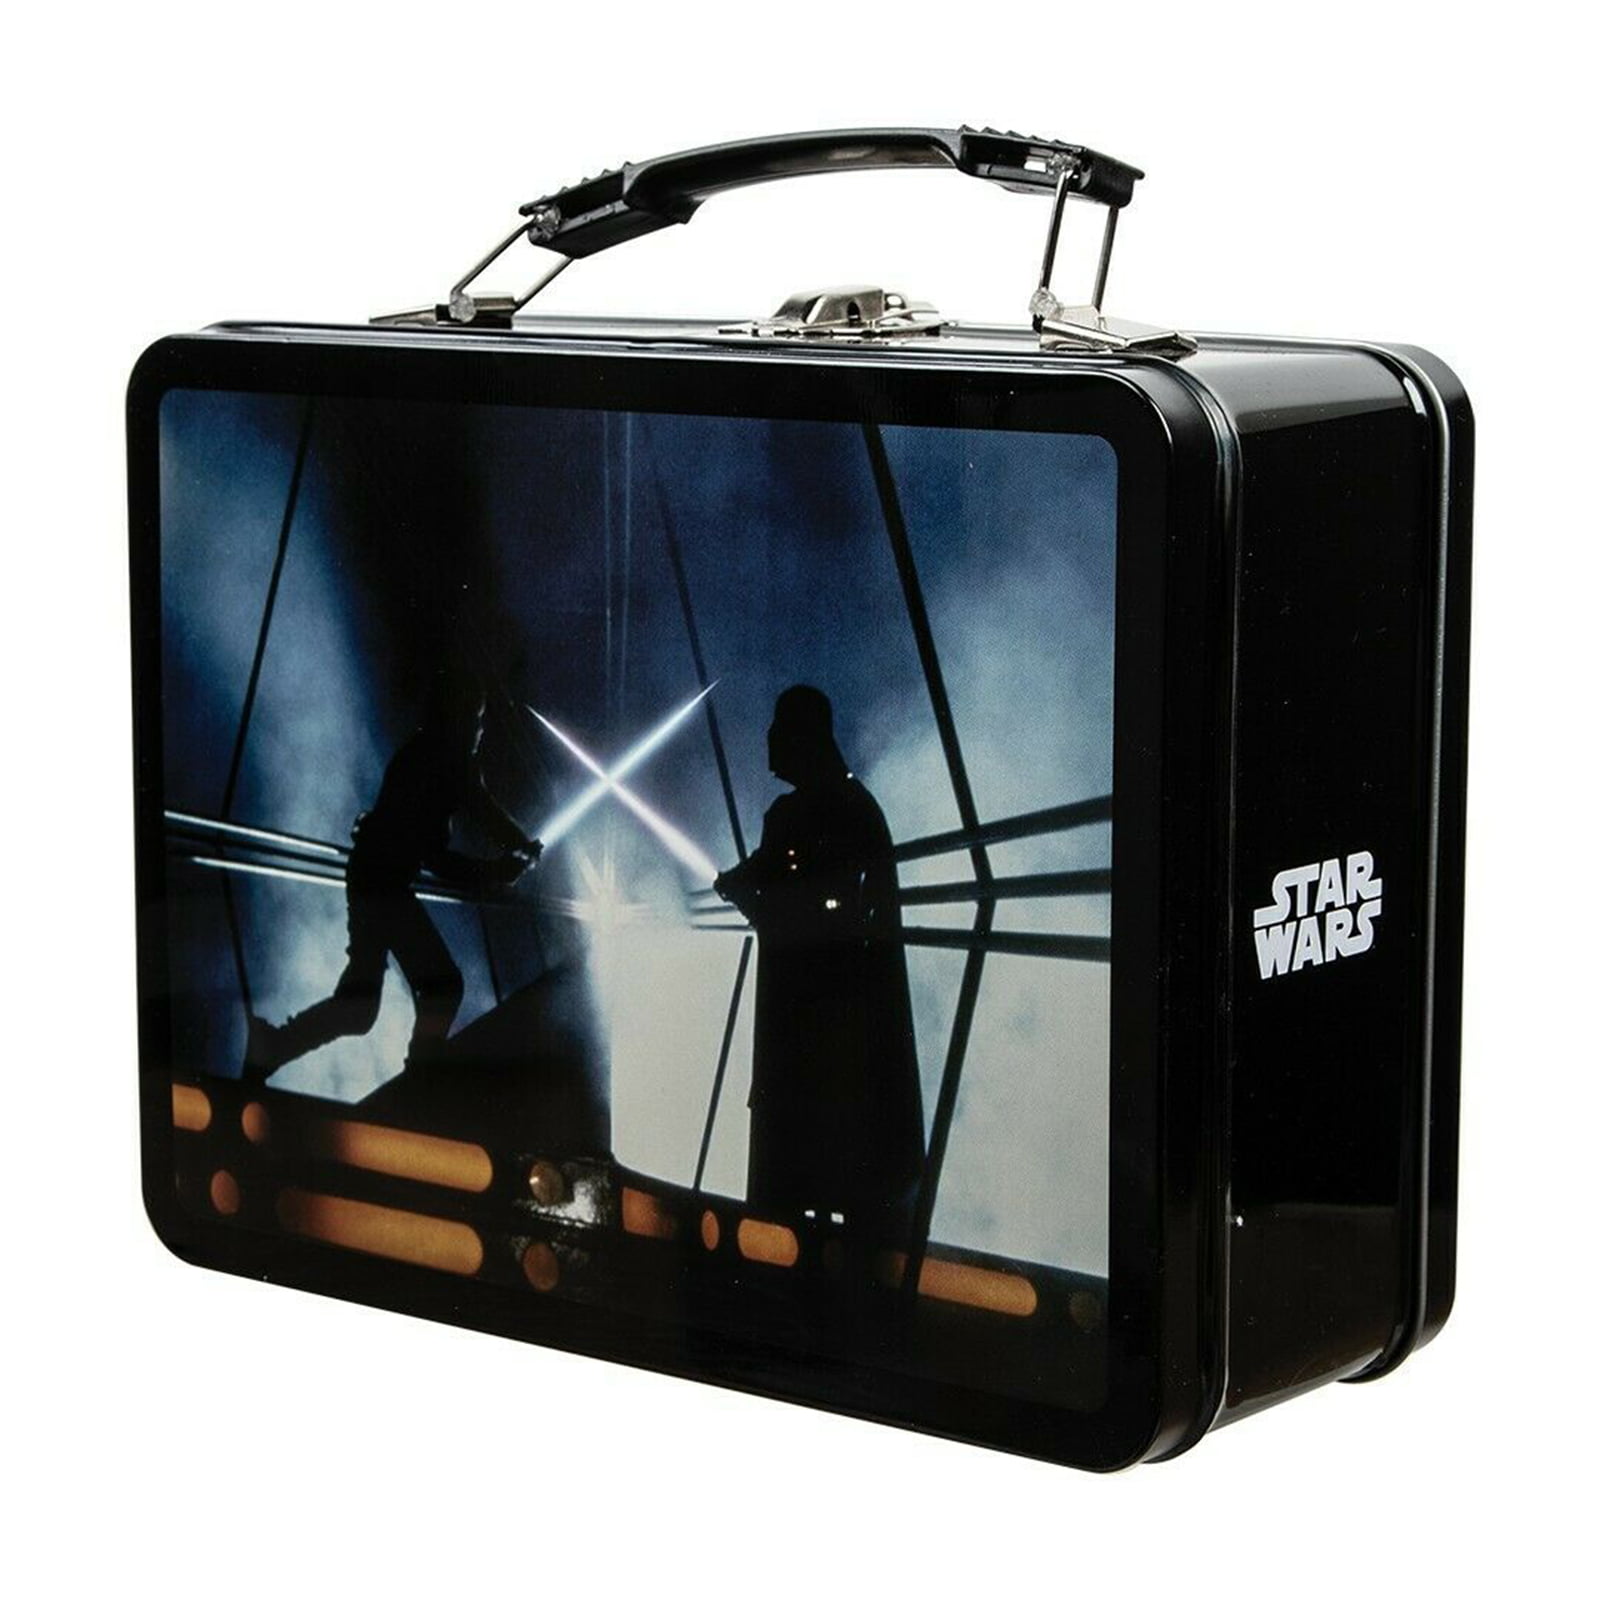 The Empire Strikes Back Star Wars Tin Lunch Box 